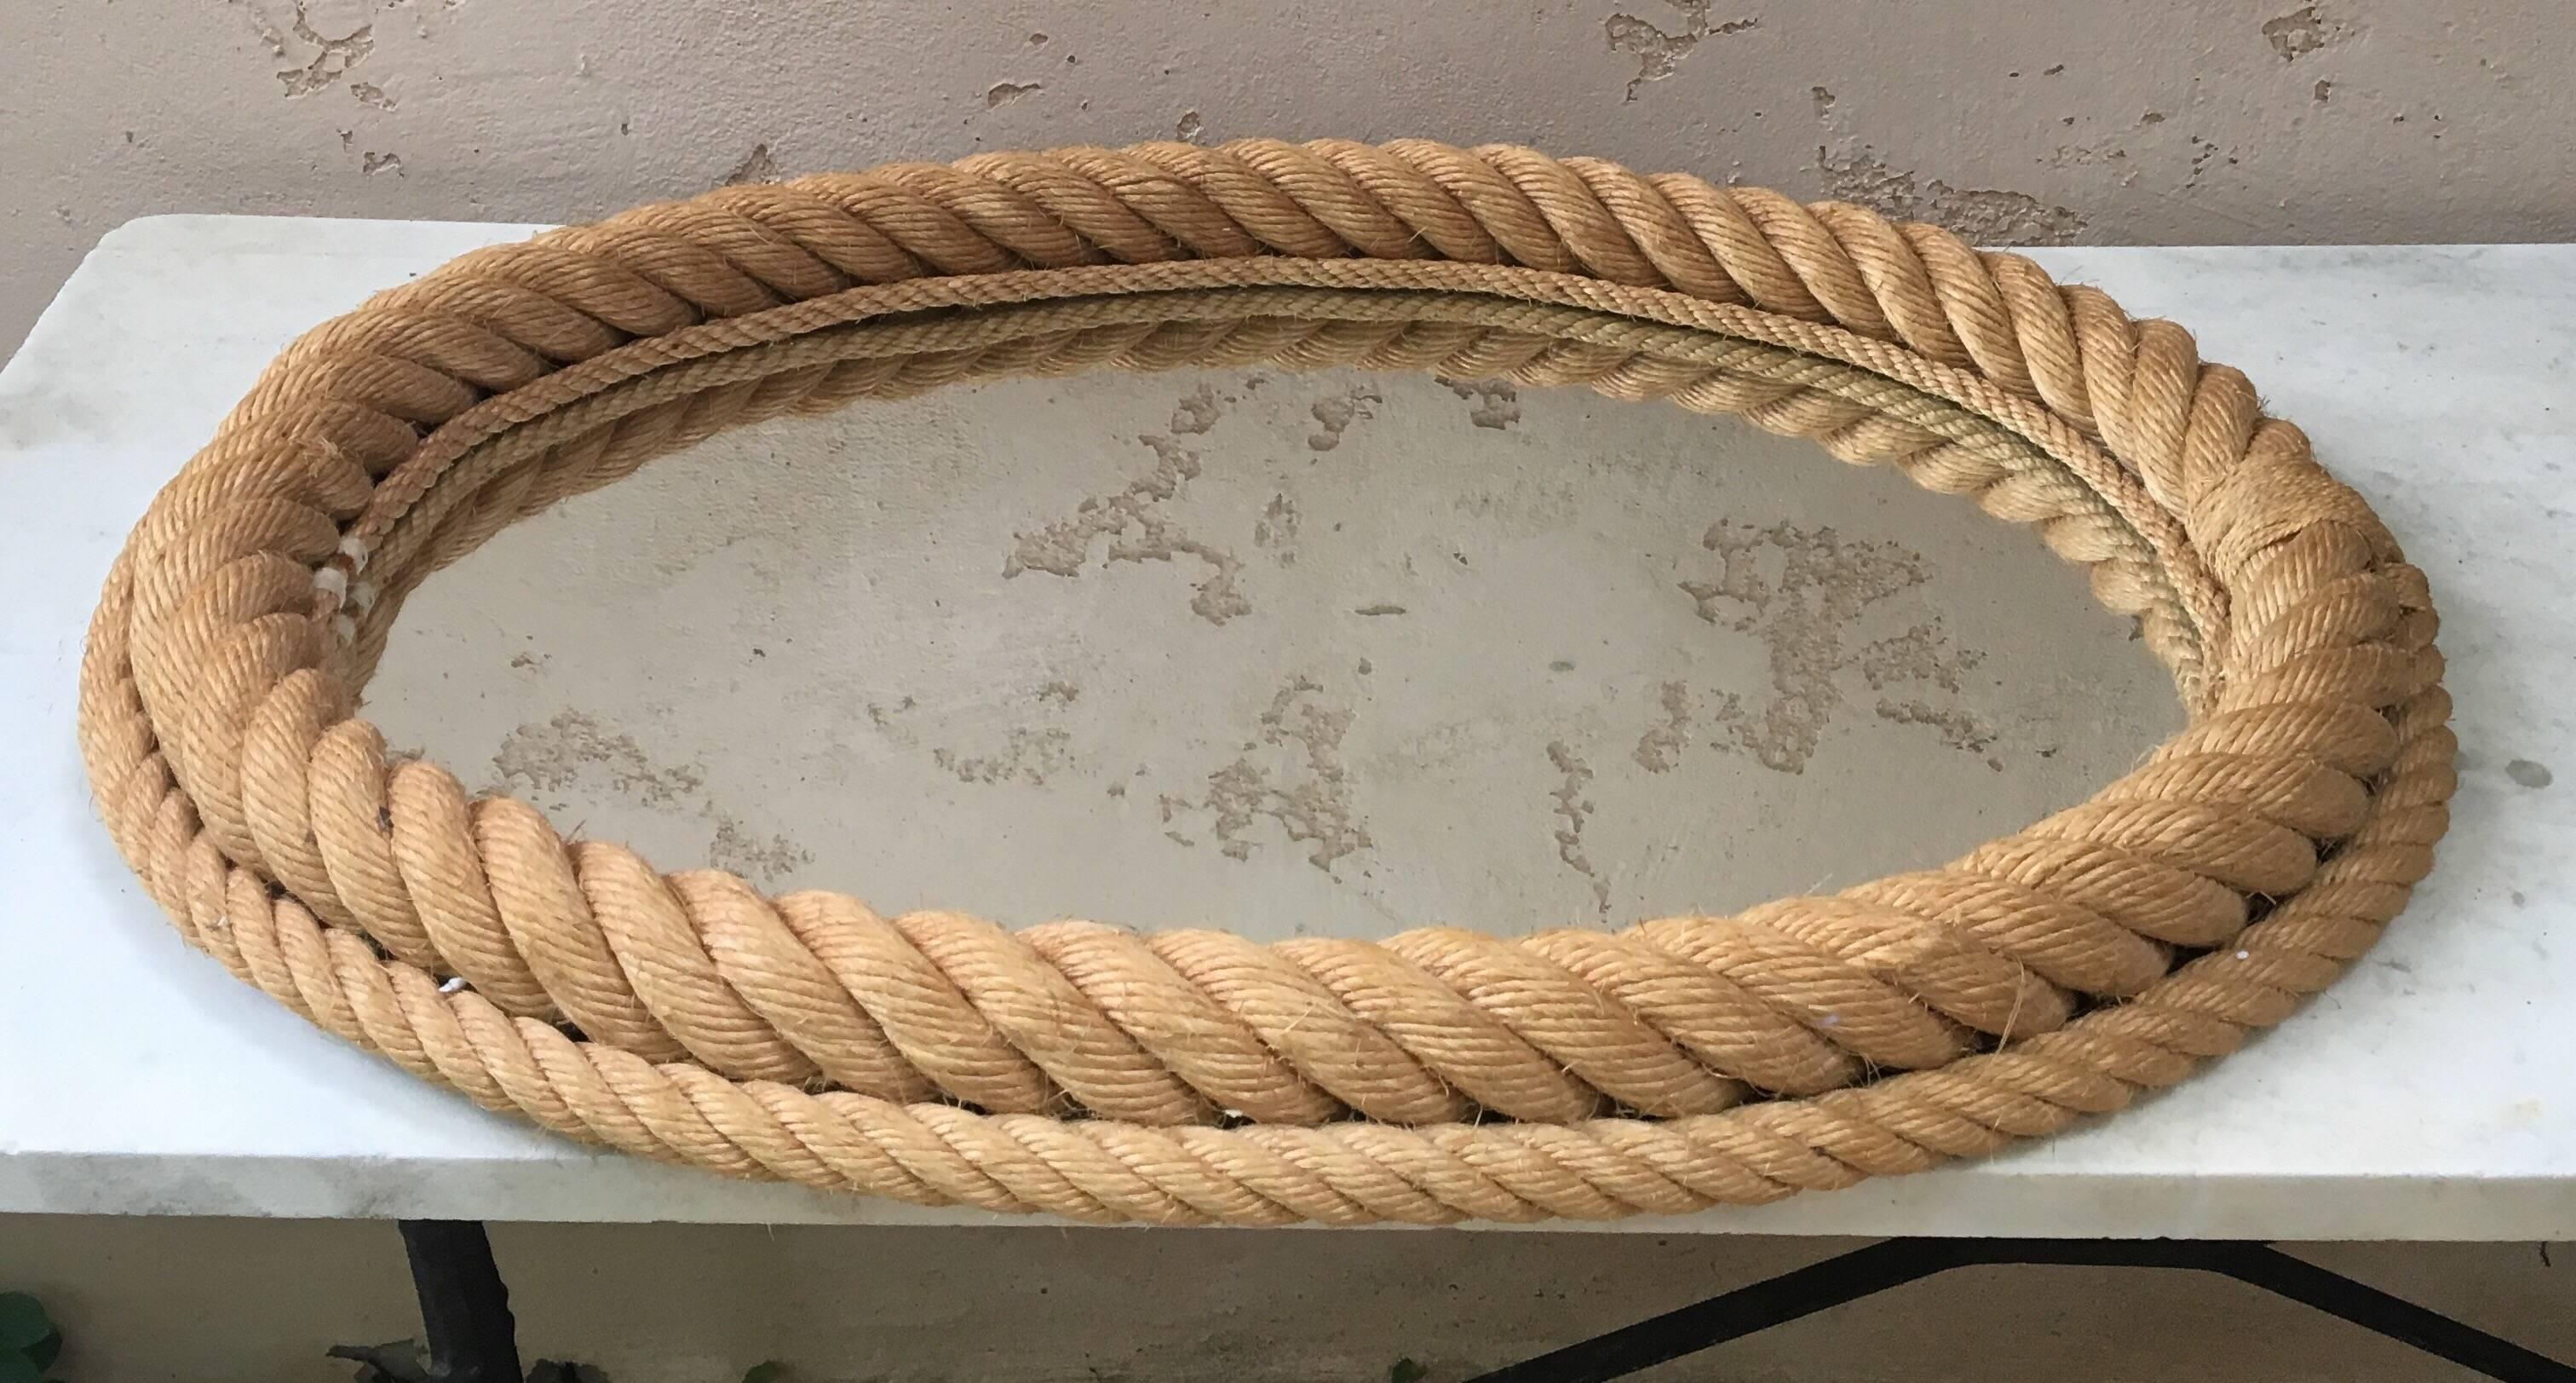 Large nautical oval rope mirror Audoux Minet circa 1960 from South of France.
Measures: 26